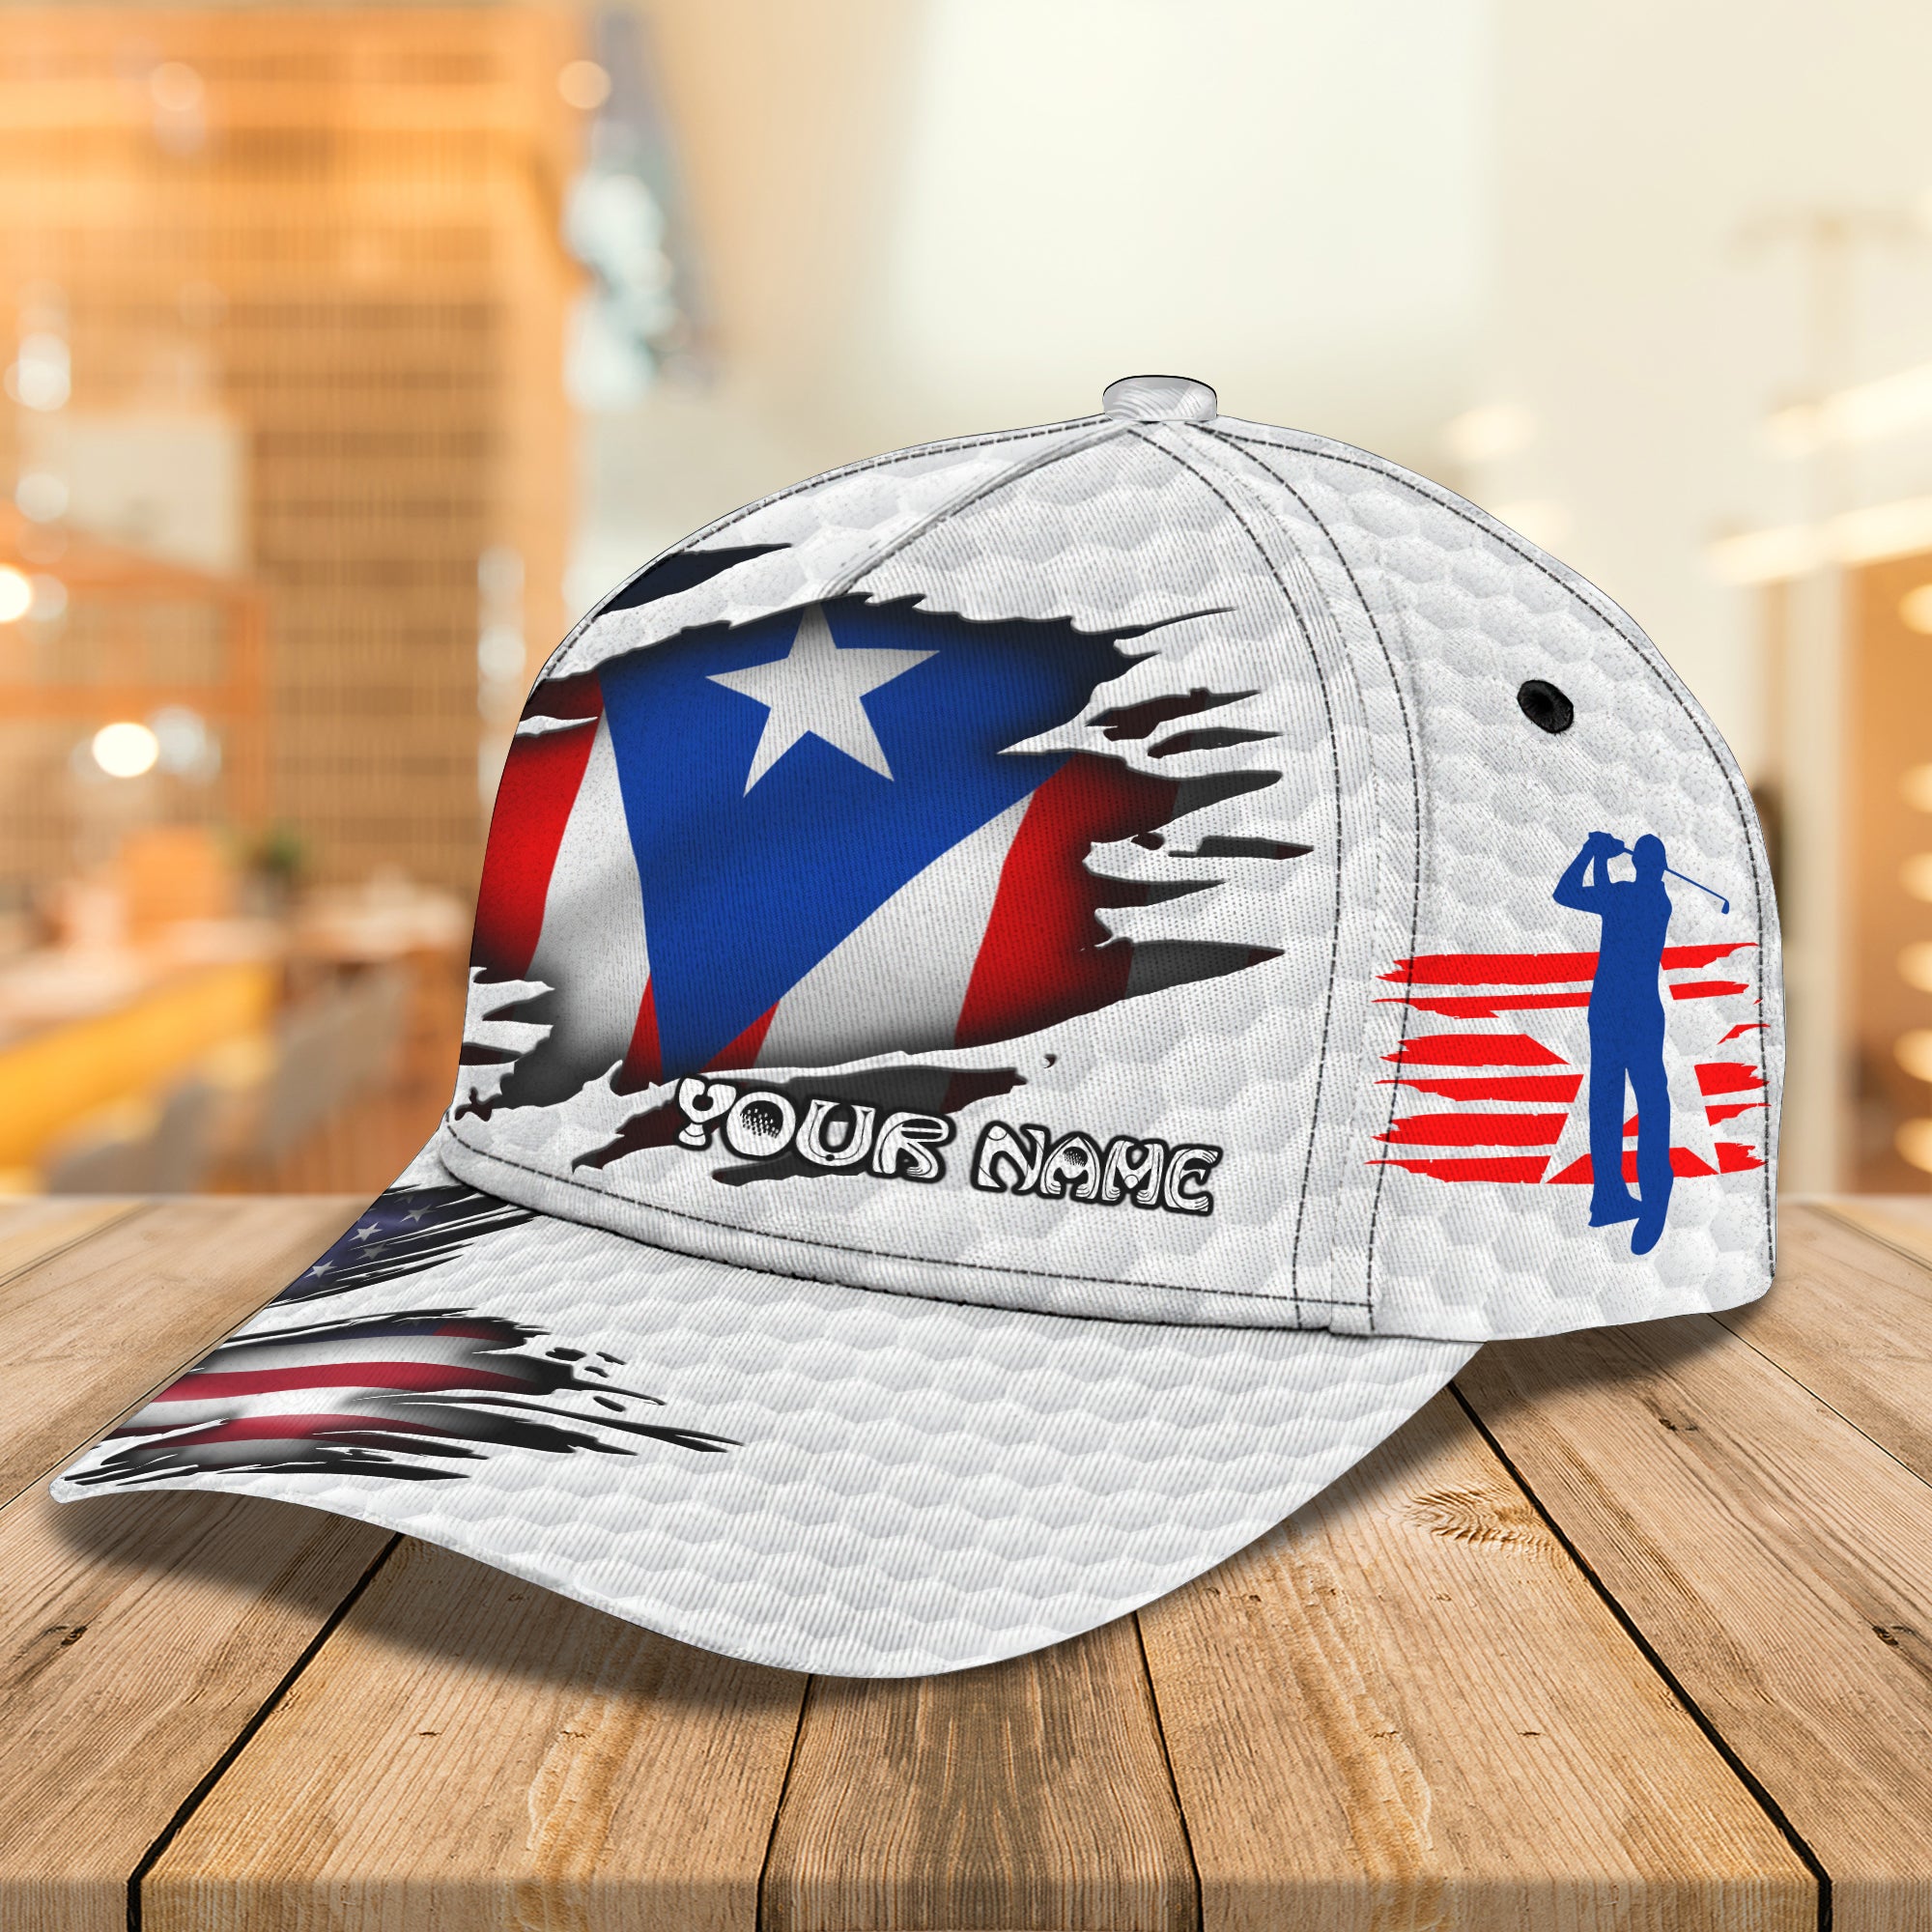 nnta - Personalized Name Cap - Puerto Rico - Golf